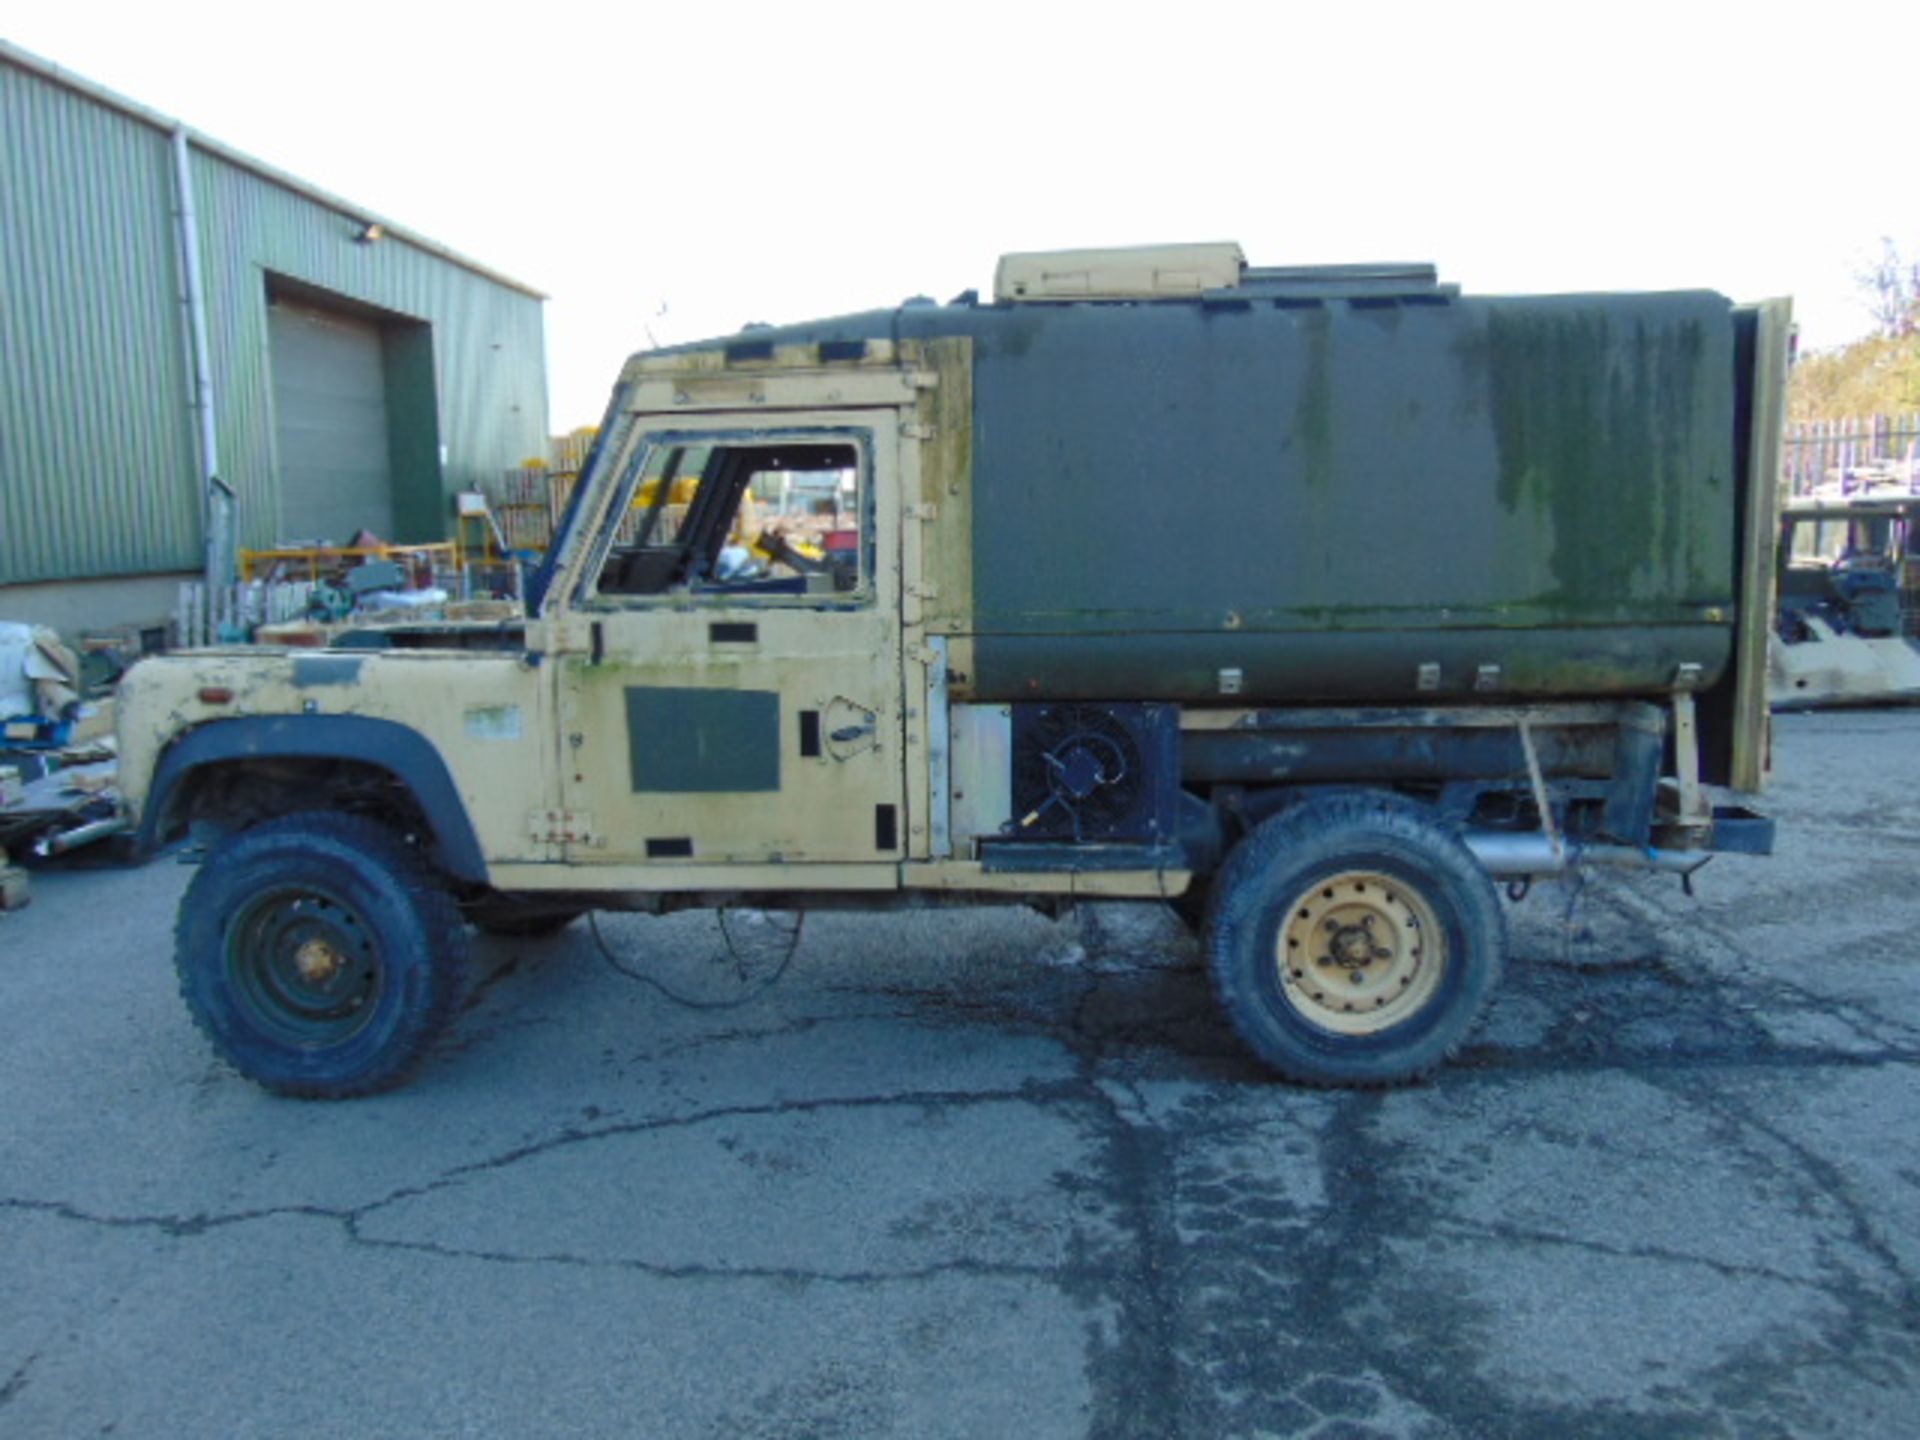 Very Rare Direct from Service Unmanned Landrover 110 300TDi Panama Snatch-2A - Image 4 of 11